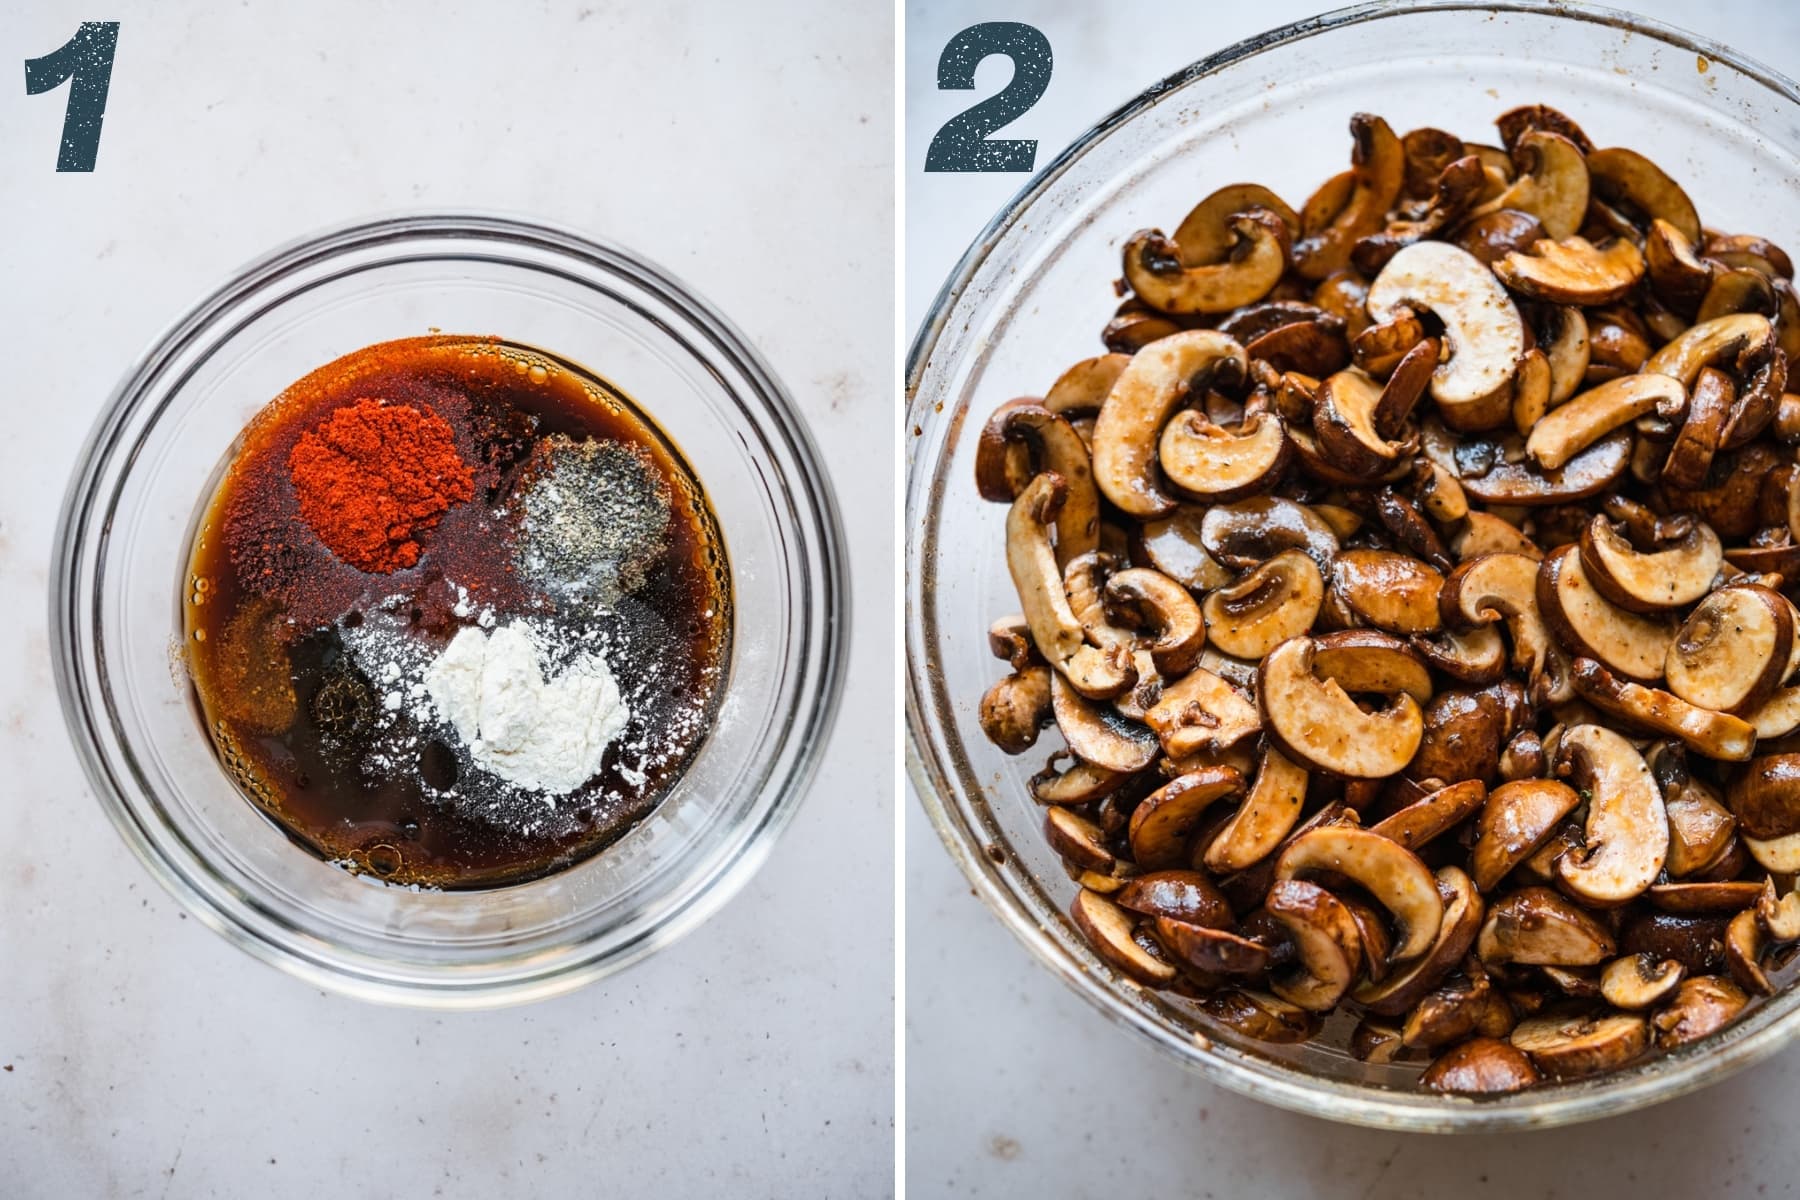 on the left: marinade ingredients for mushroom bacon in bowl. on the right: mushrooms being marinated. 